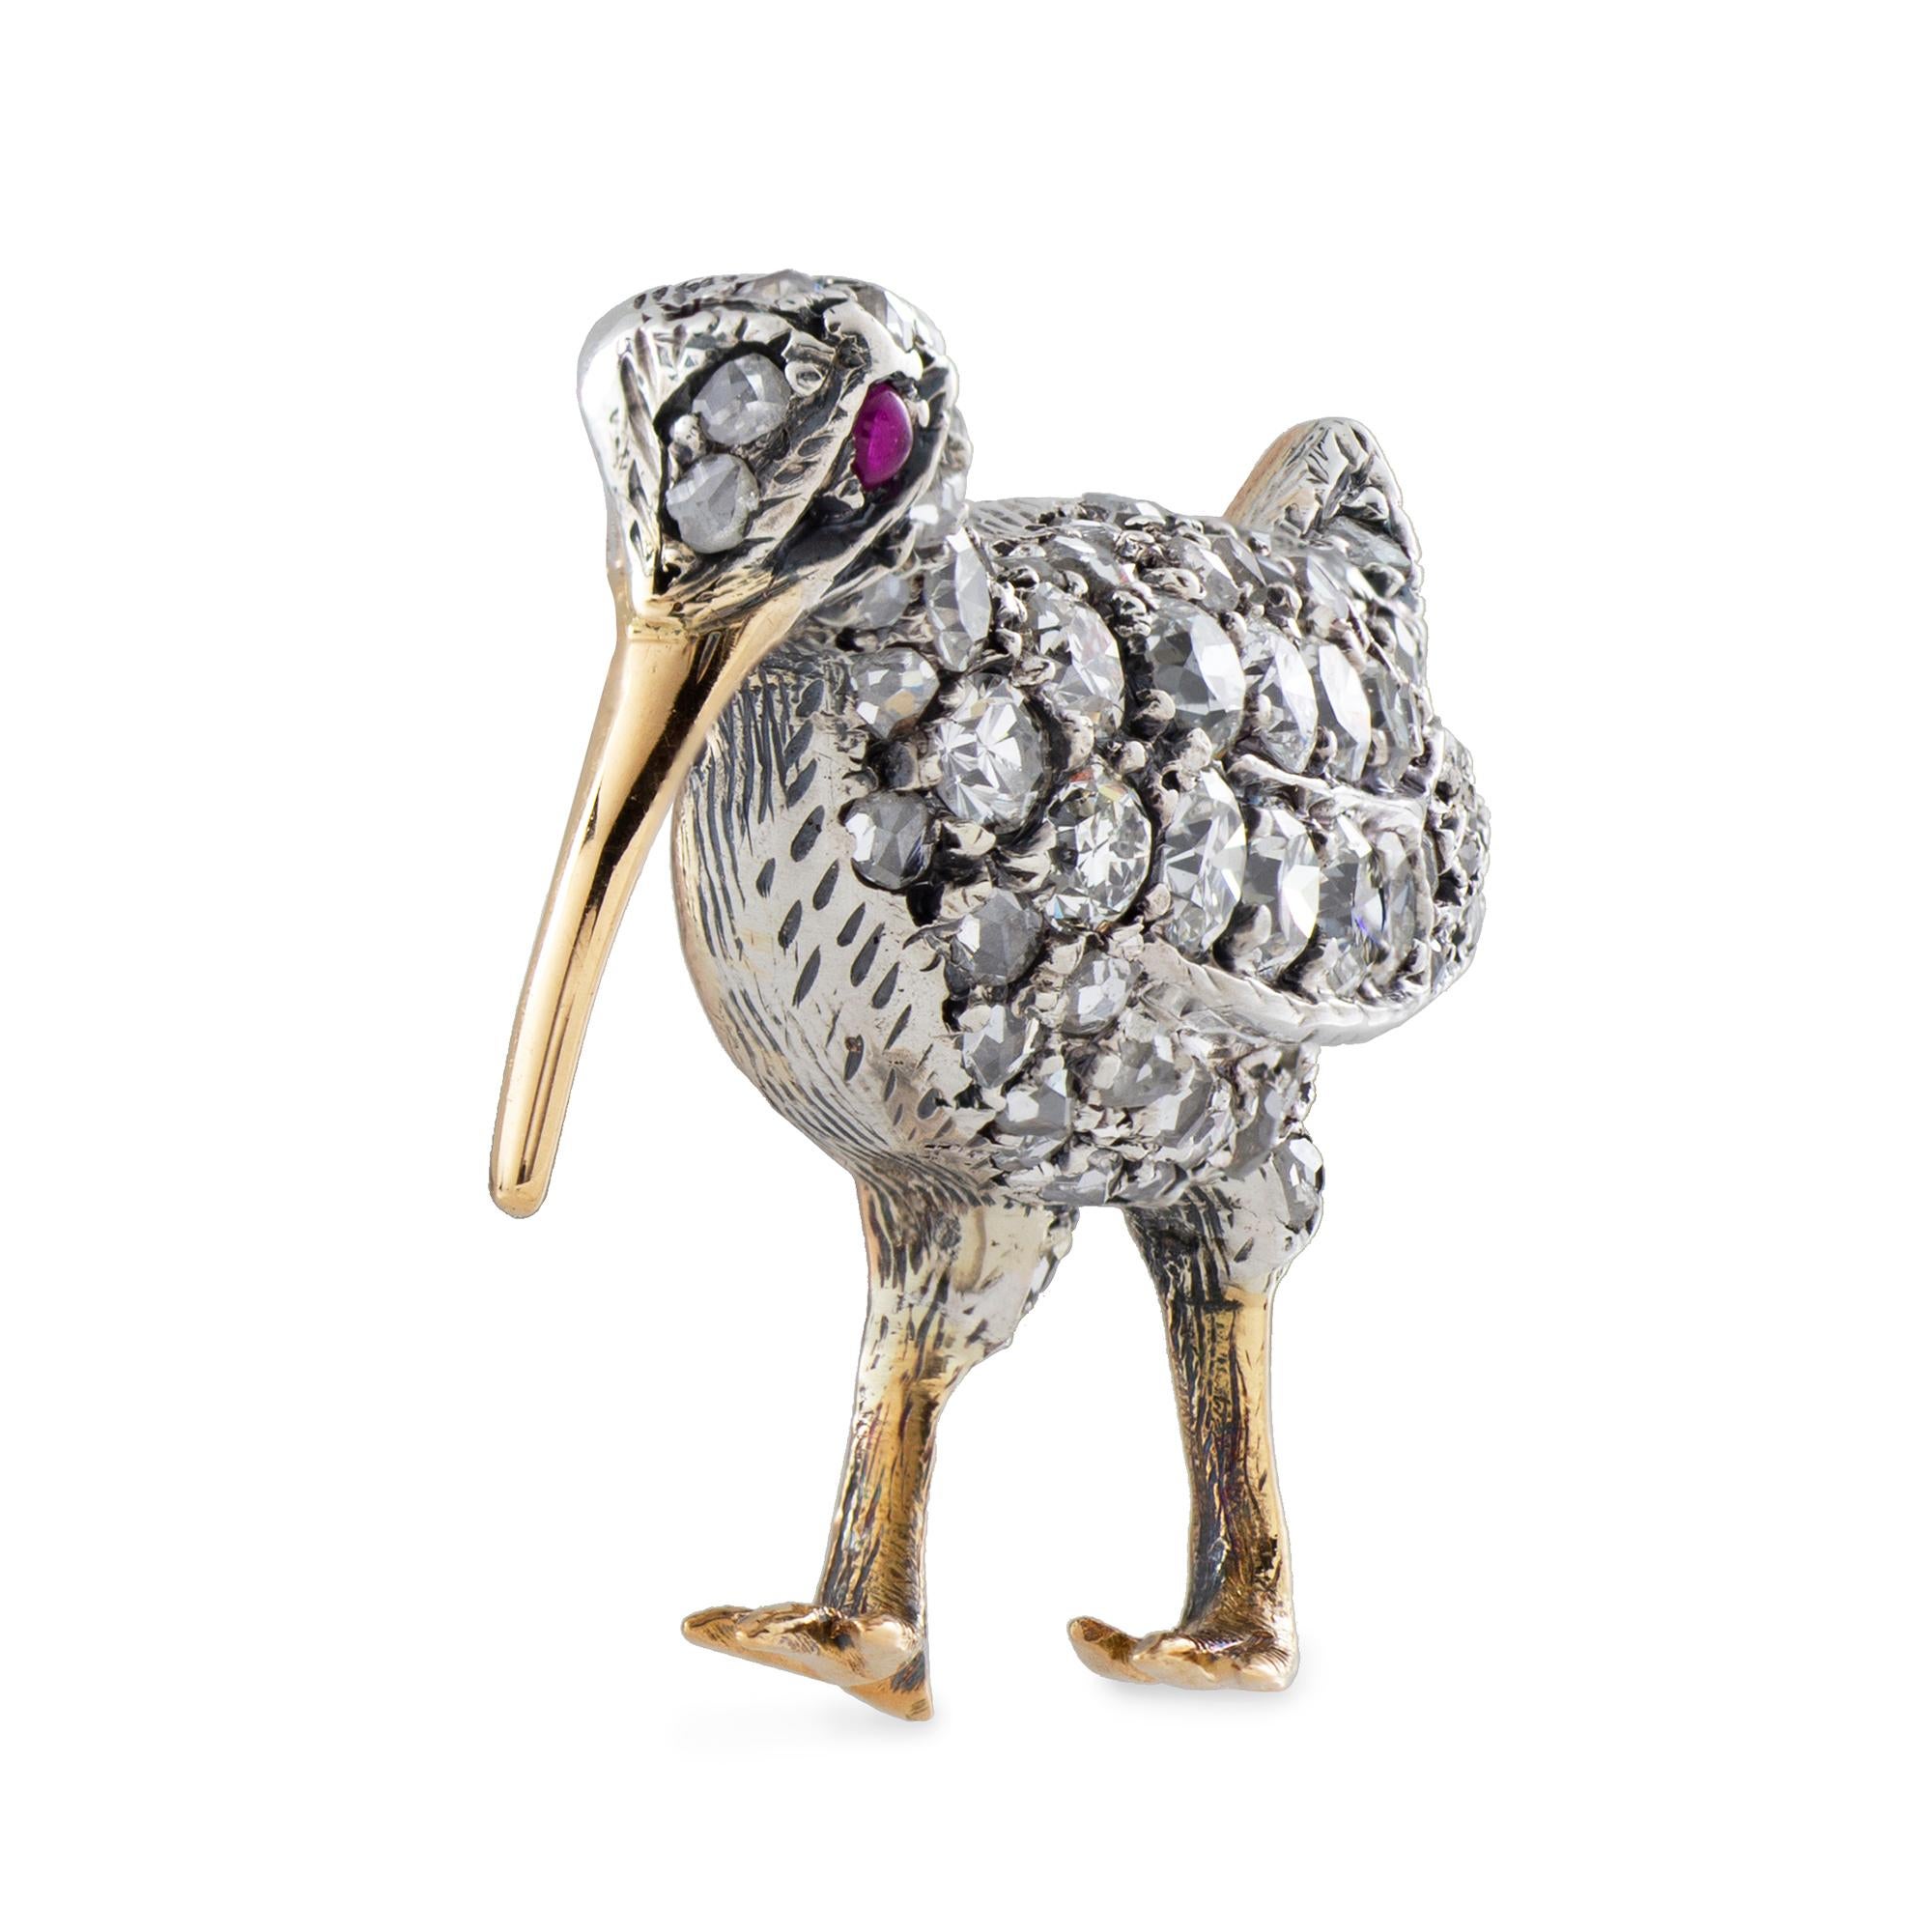 A late Victorian diamond bird brooch, finely modelled in the form of a curlew, the head and plumage encrusted with old brilliant-cut and rose-cut diamonds, grain to a silver mount with 18ct yellow gold legs, bill and mount, with a cabochon ruby eye,